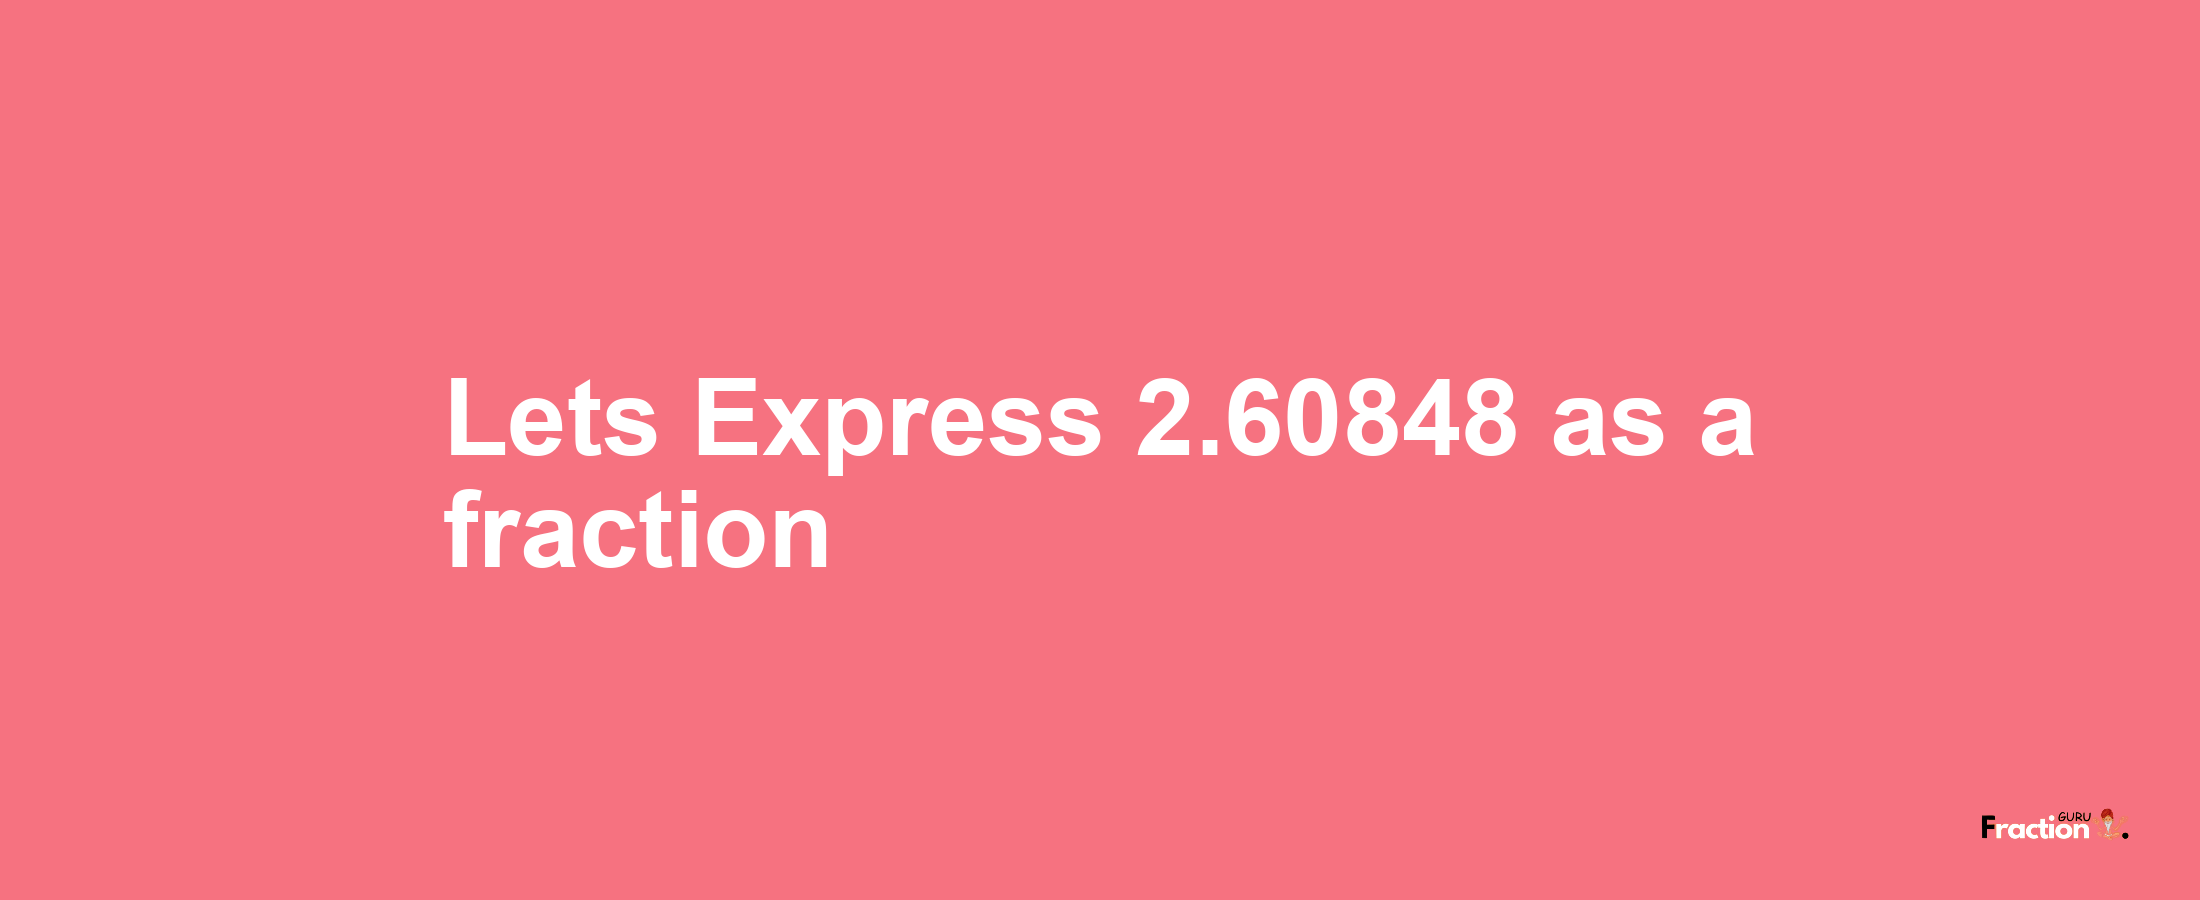 Lets Express 2.60848 as afraction